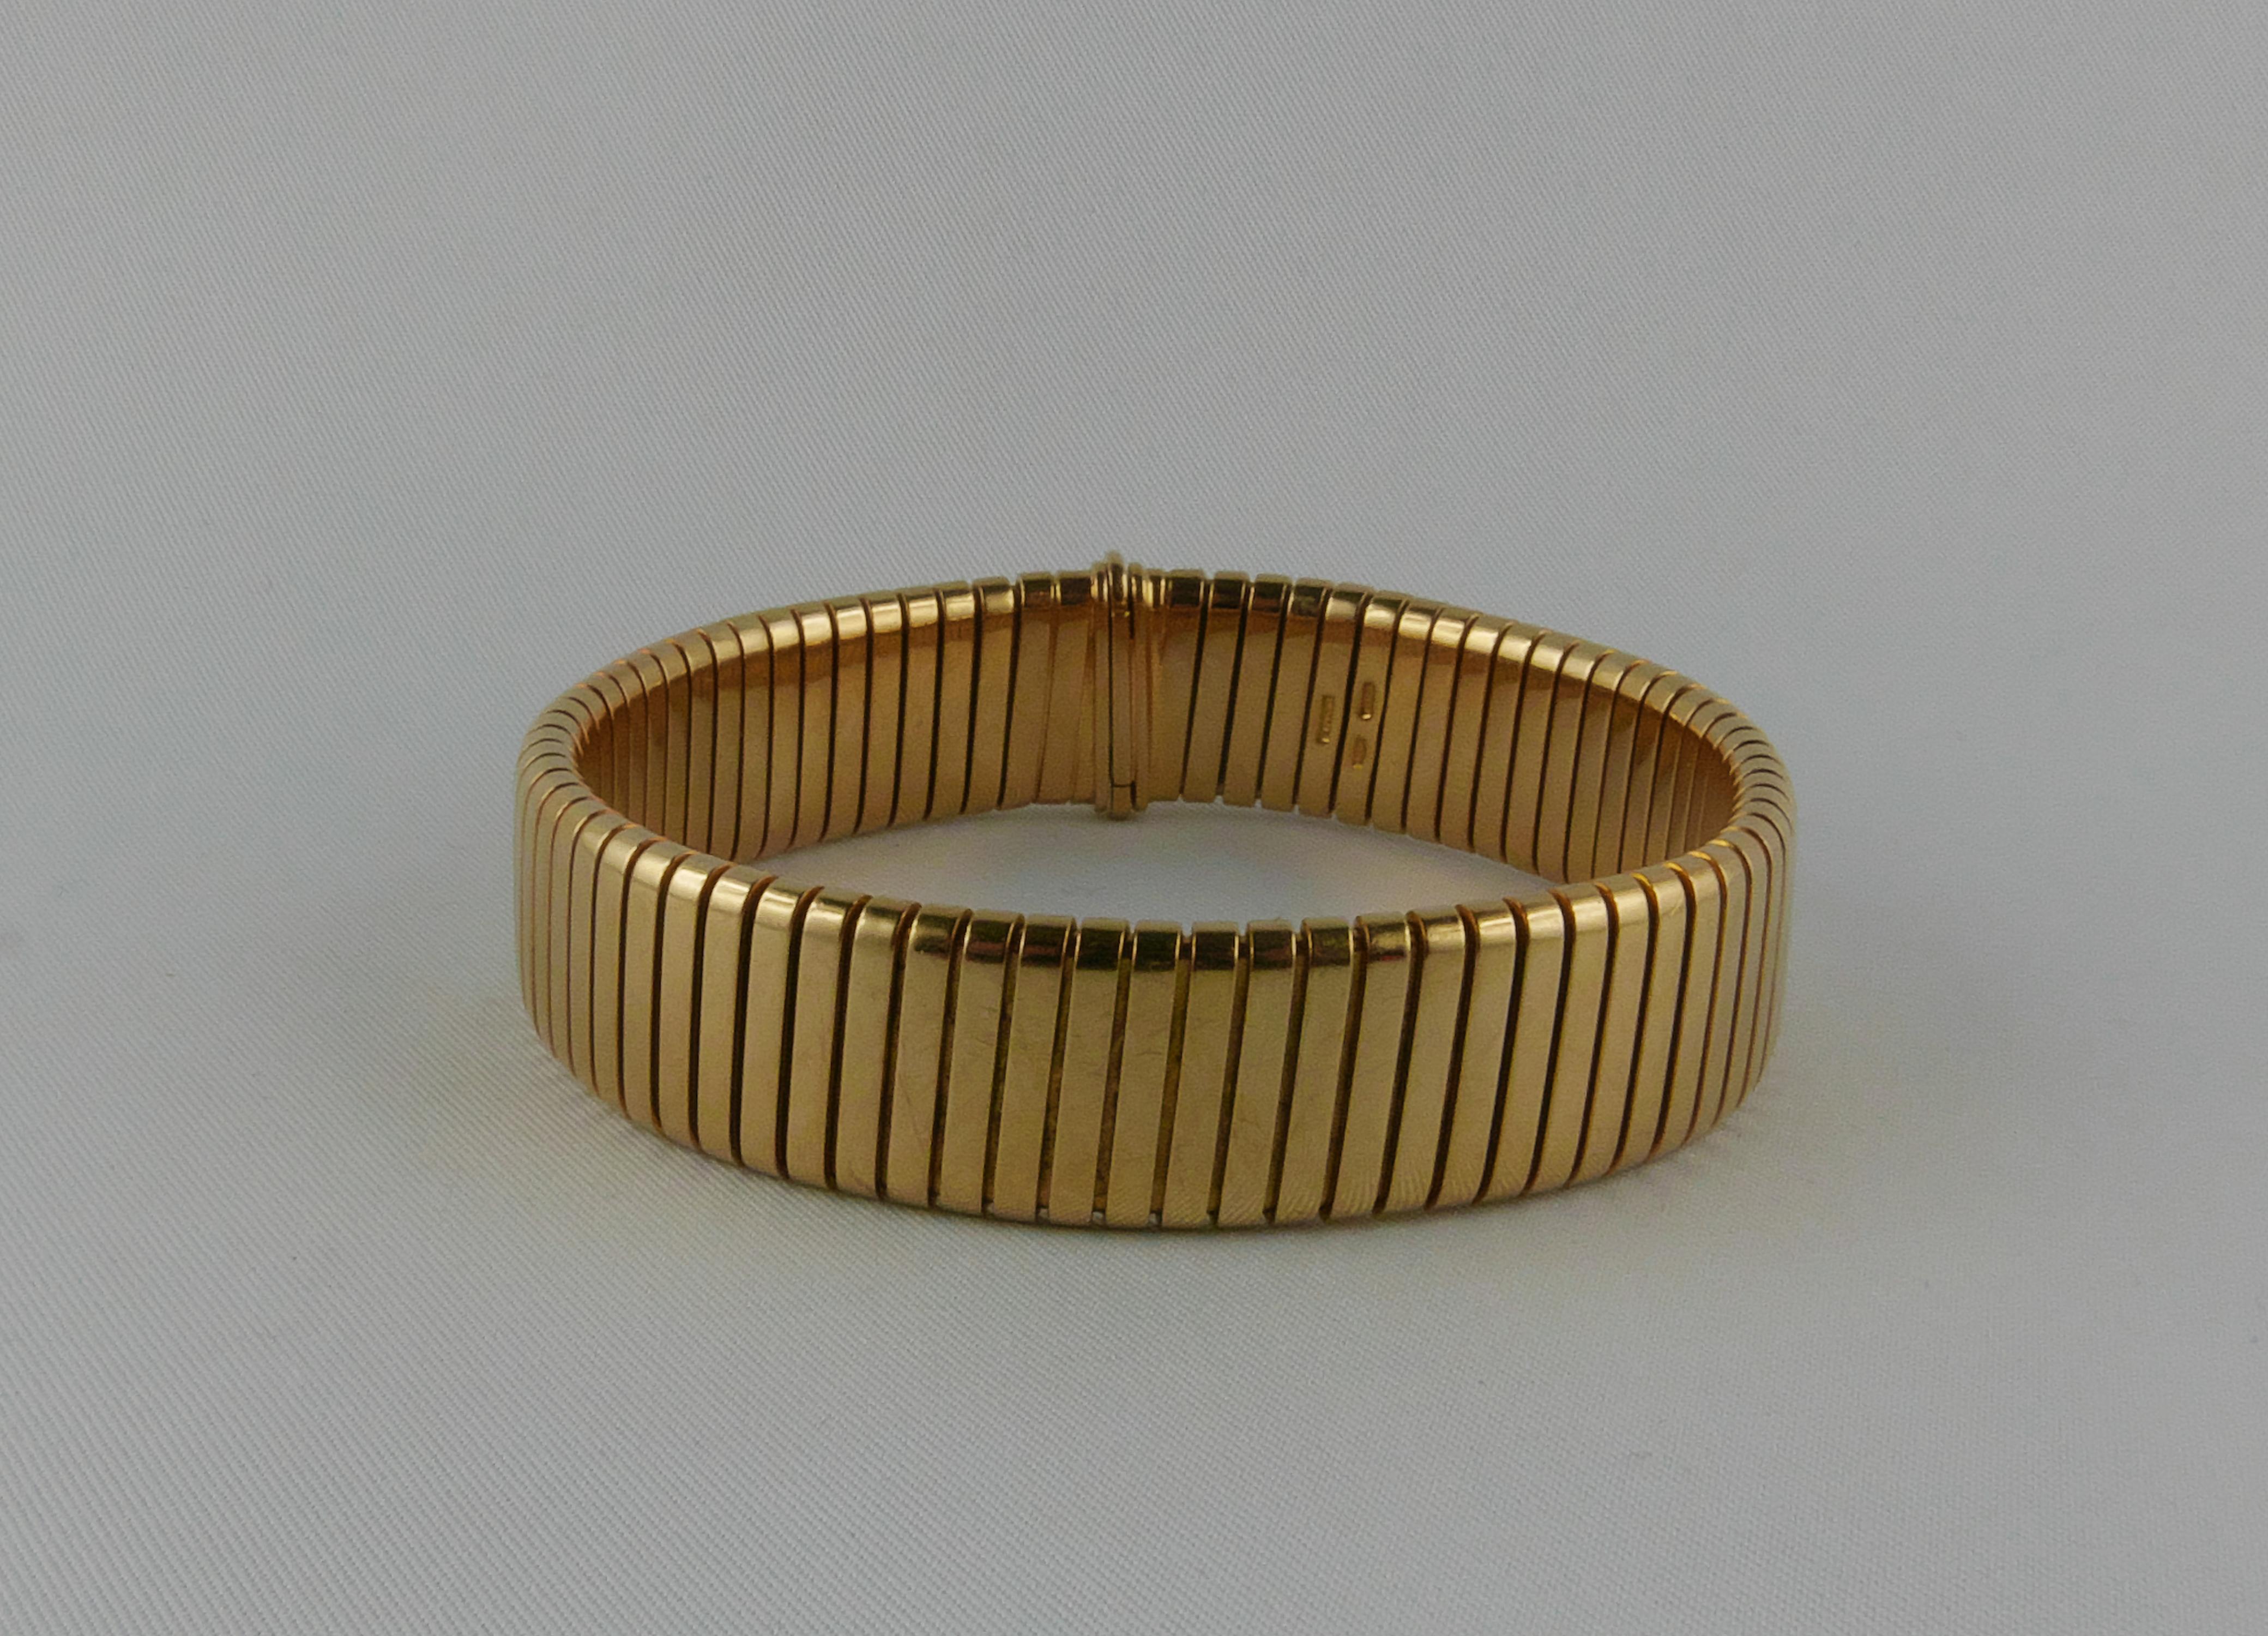 Italian 1980’s flexible Bracelet signed Bvlgari, with the iconic Tubogas linear pattern, crafted in 18k polished Yellow Gold.
Bvlgari’s Tubogas is a flexible band with rounded contours produced without soldering and requiring hours of specialist